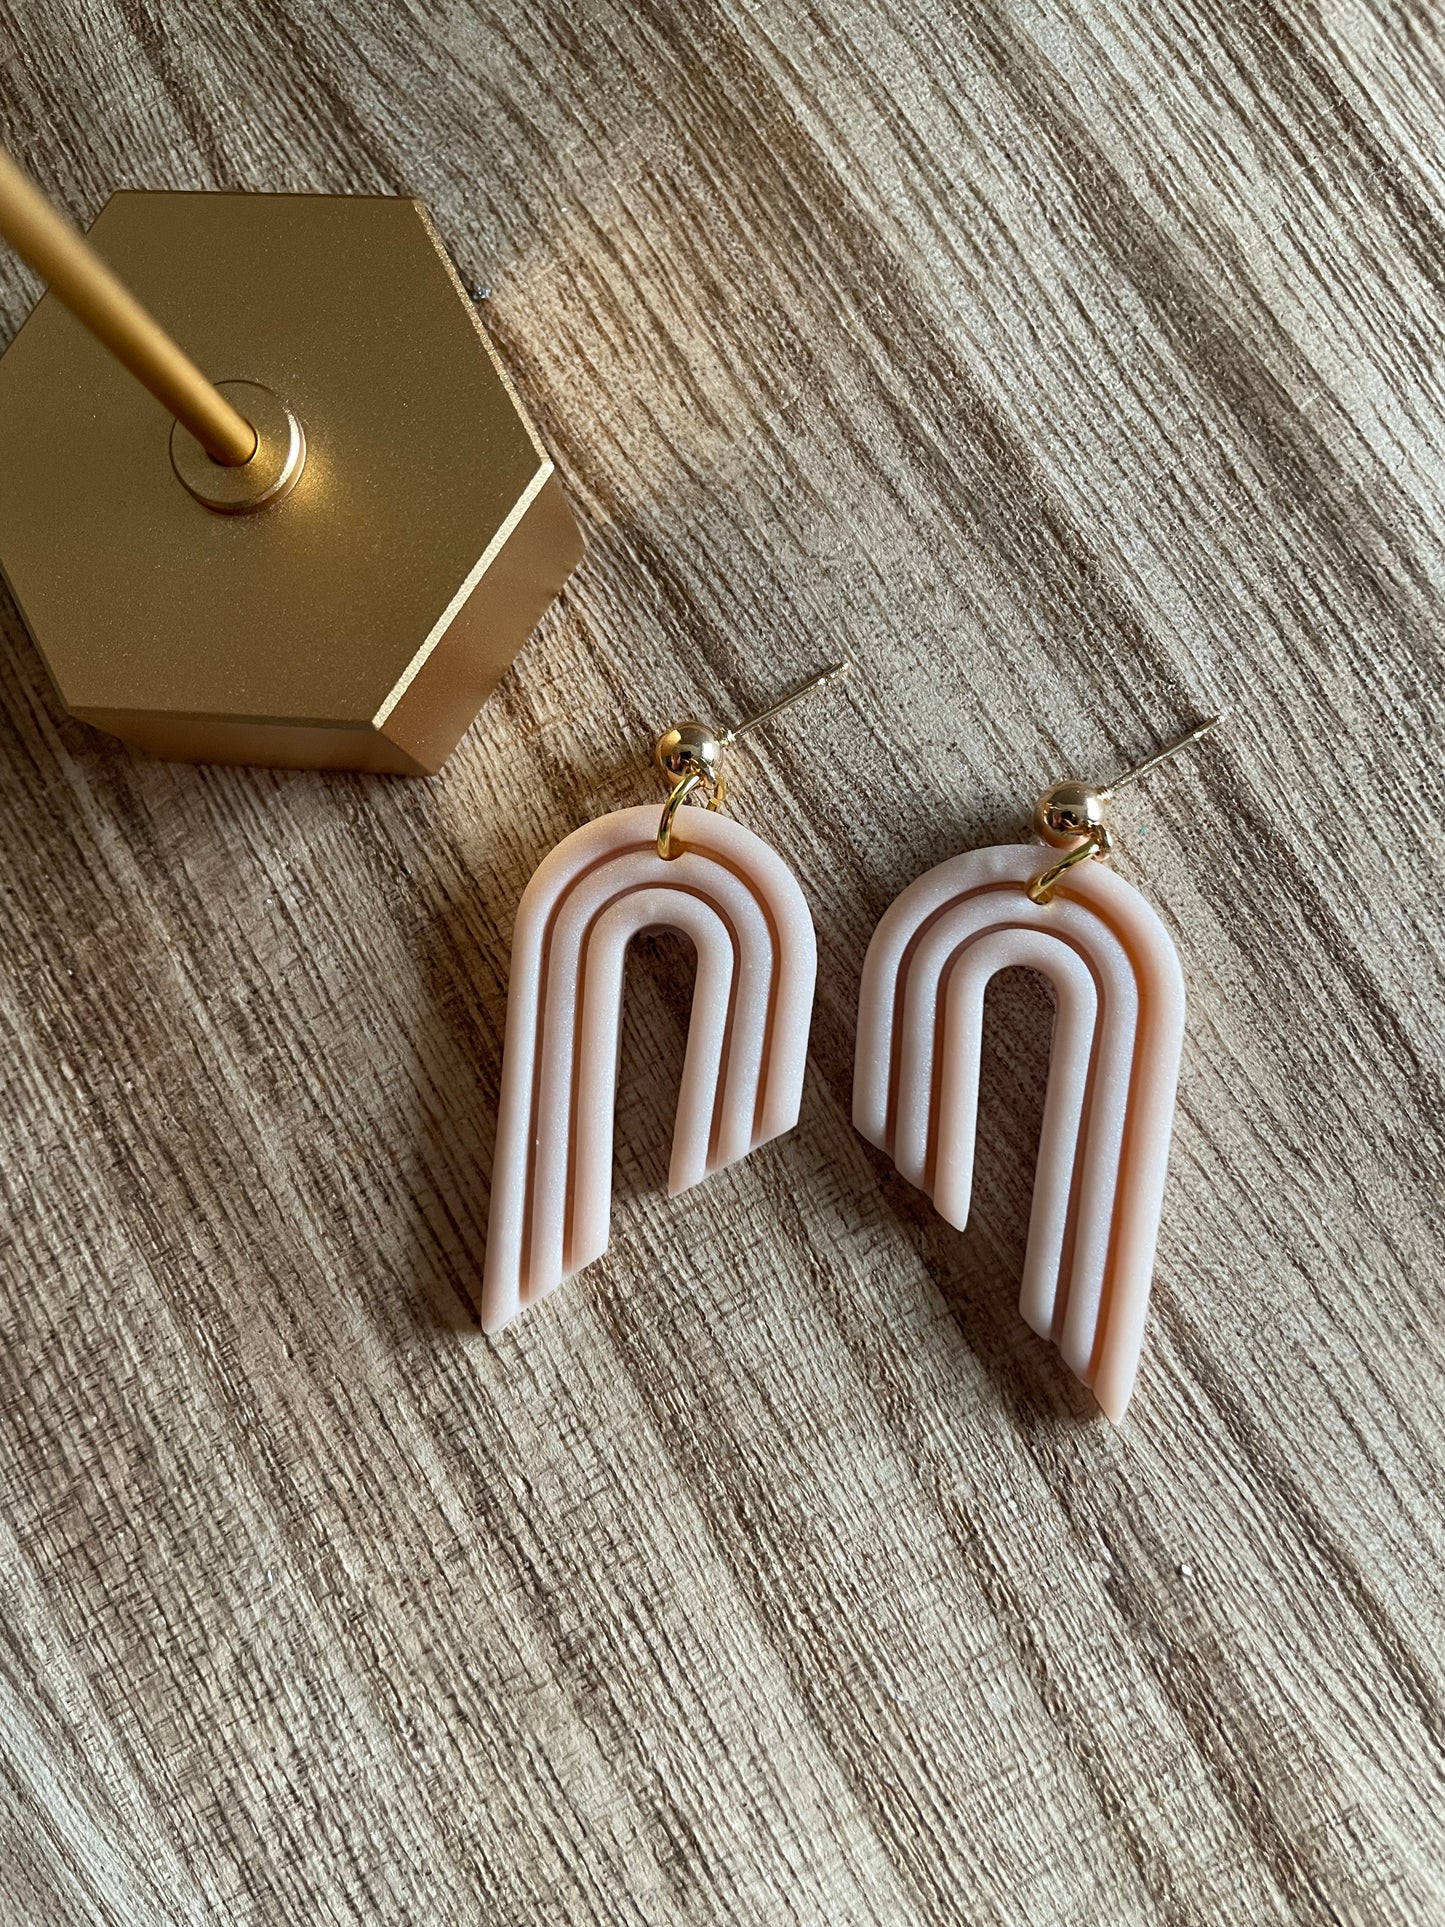 clay earrings | art deco arches